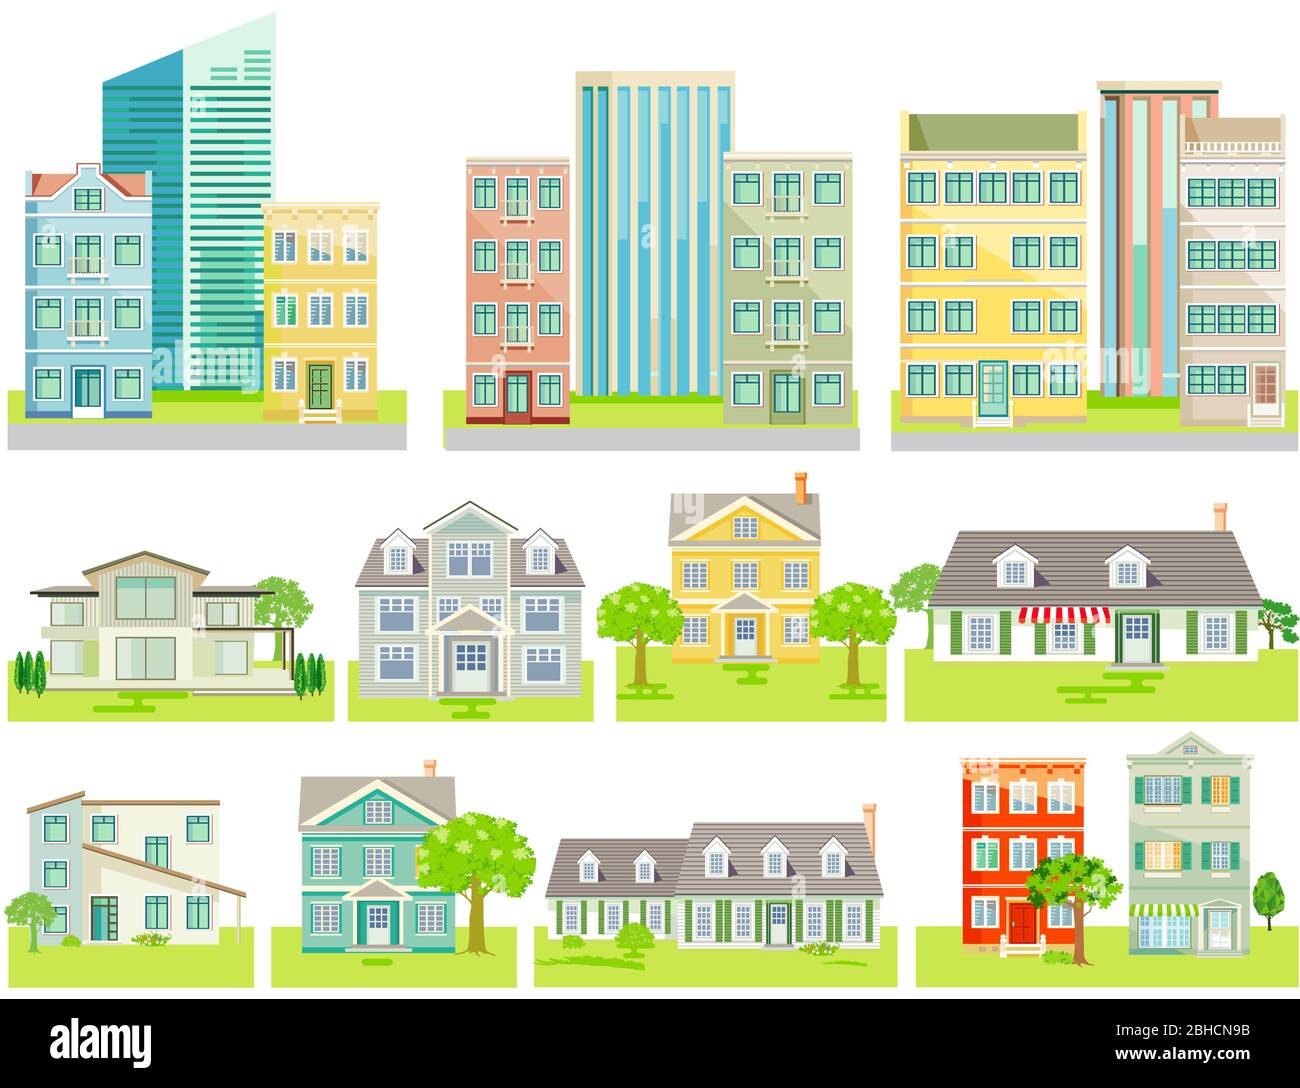 City with colorful houses and pedestrians Stock Vector